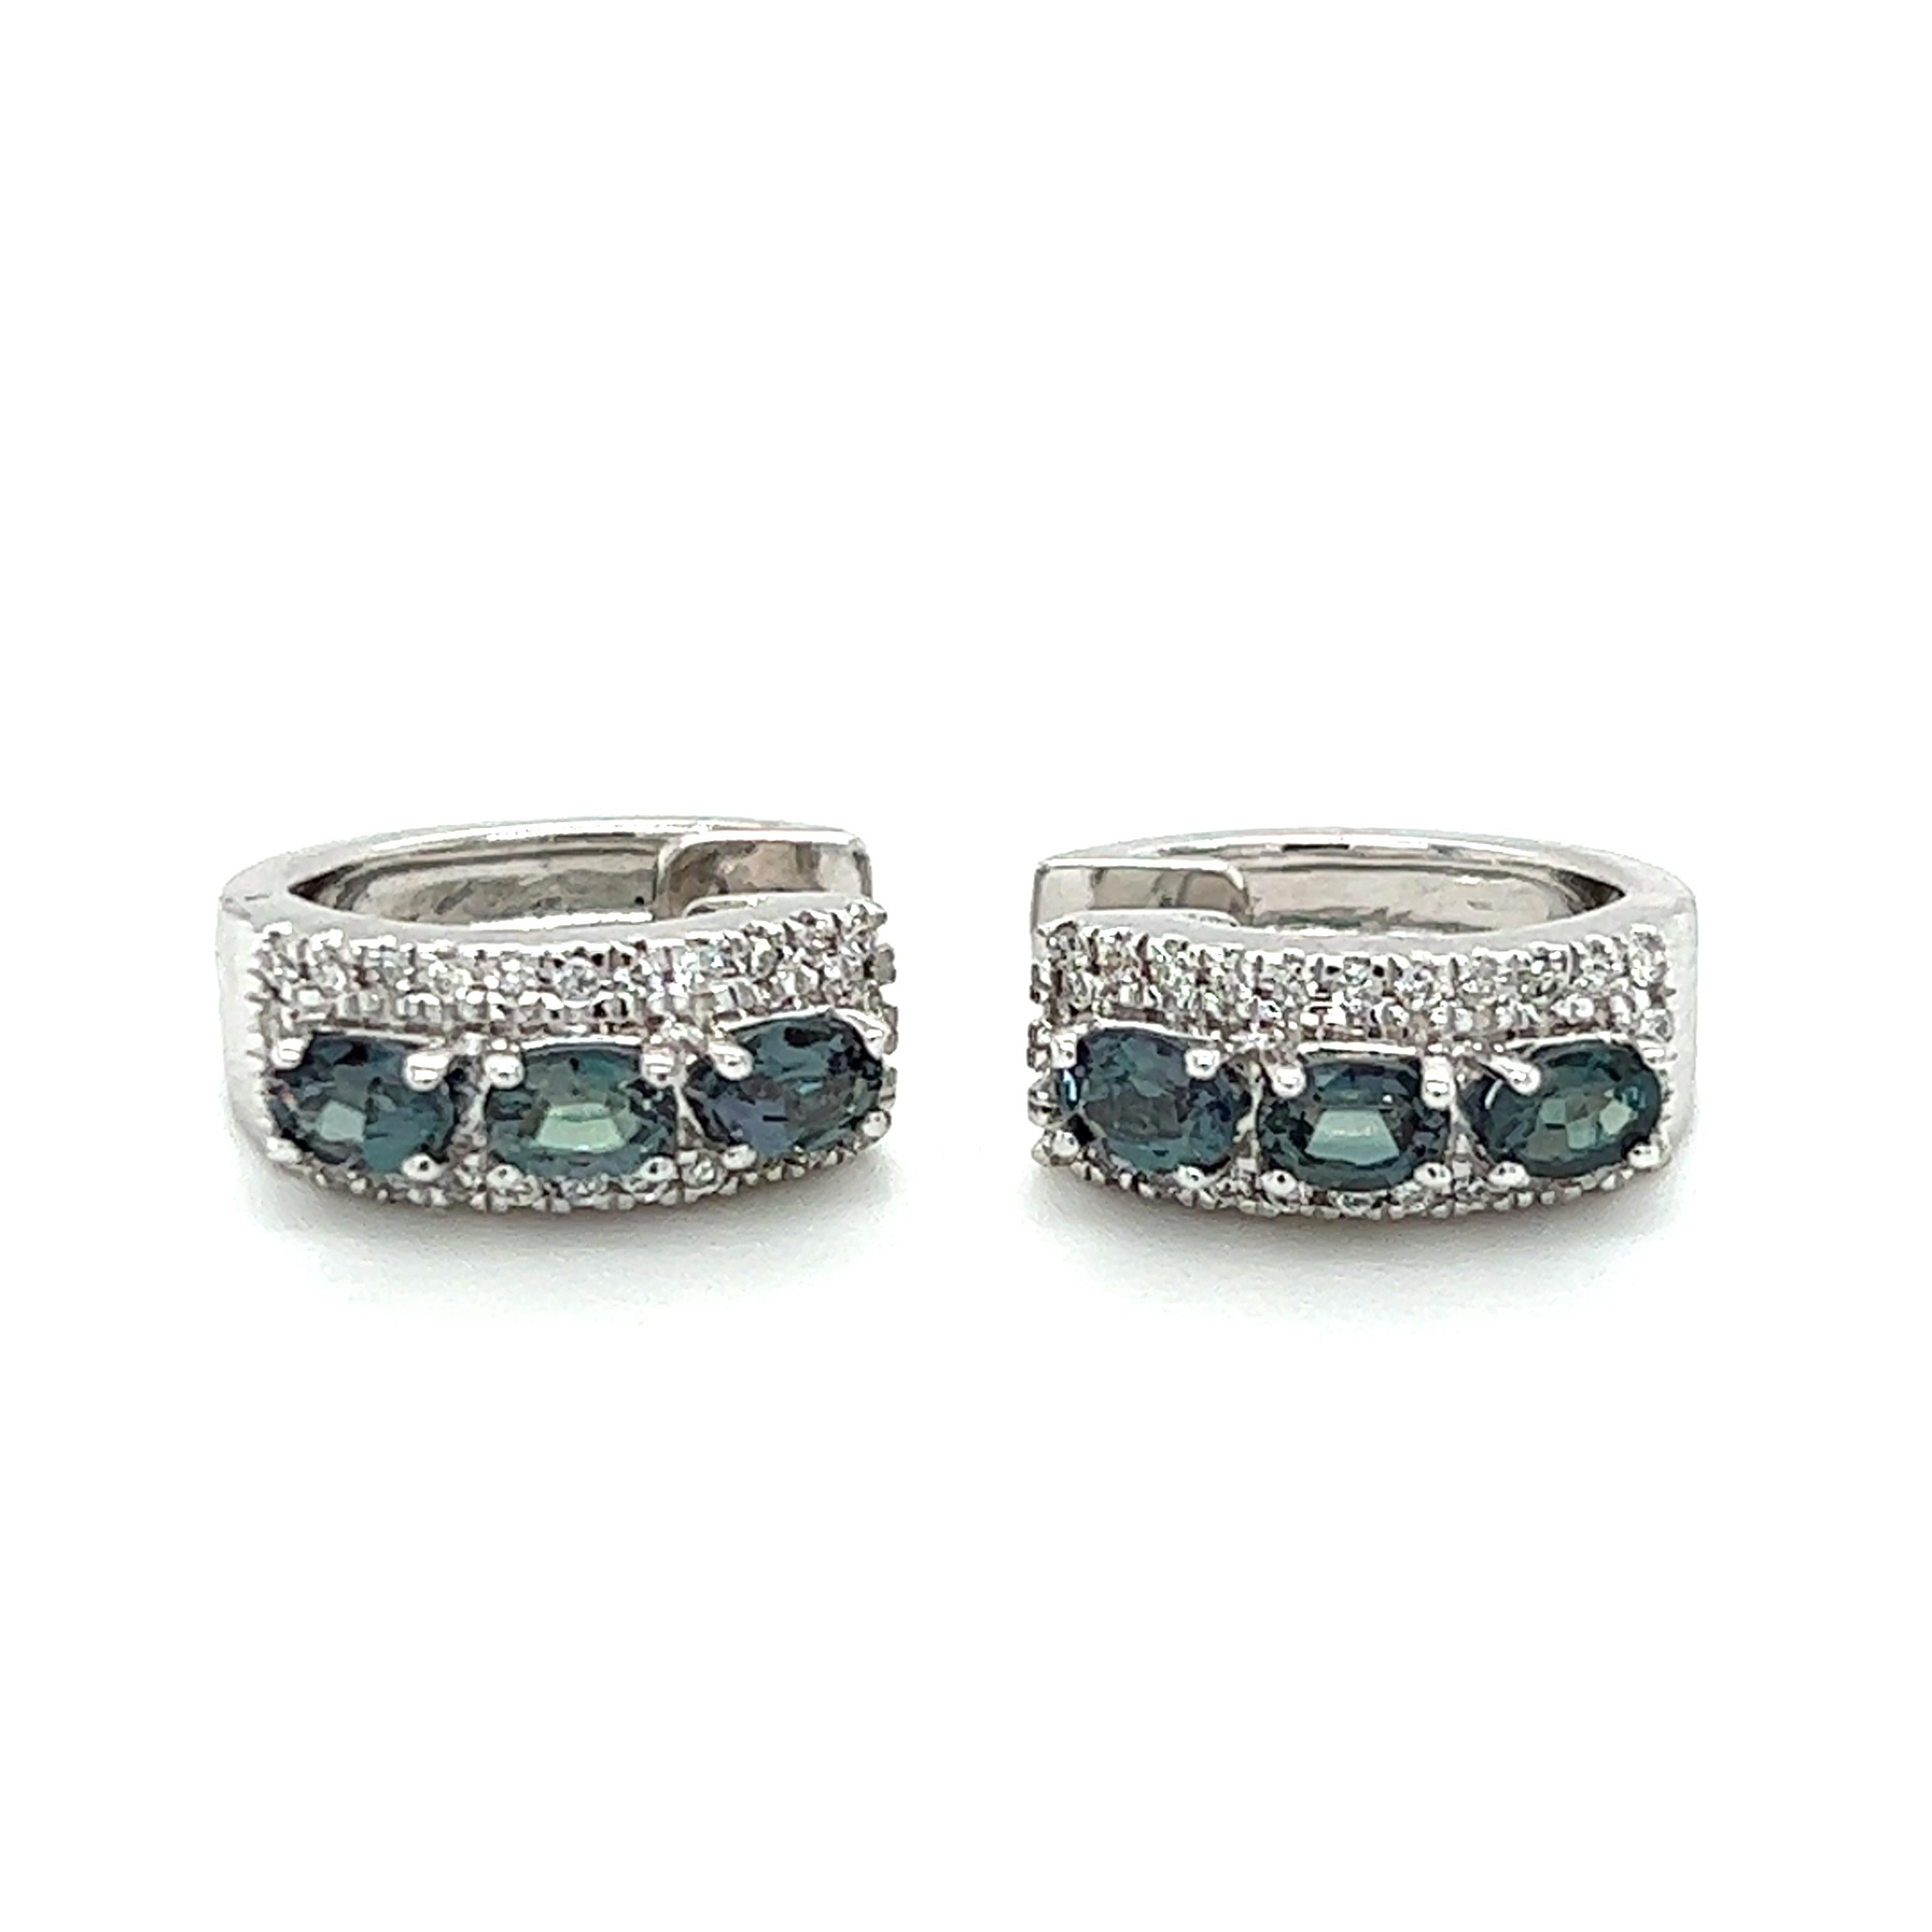 One pair of 18-karat white gold huggie hoop earrings, designed by Mark Henry, featuring six (6) oval natural Alexandrite stones, approximately 0.95-carat total weight, and Pavé set brilliant cut diamonds, approximately 0.20-carat total weight with